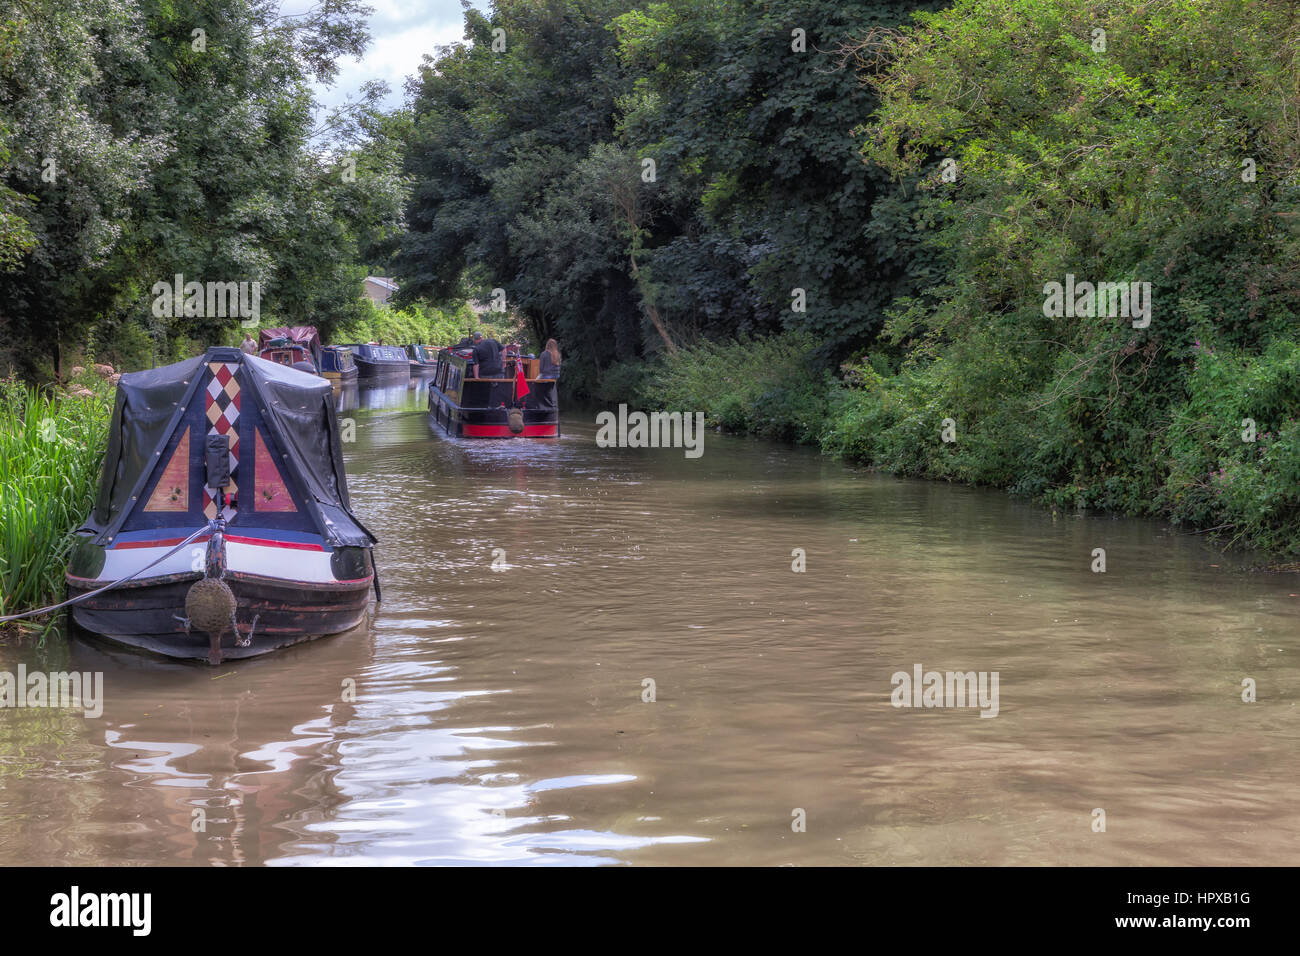 An idylic waterside scence on Britain's canal network. Stock Photo